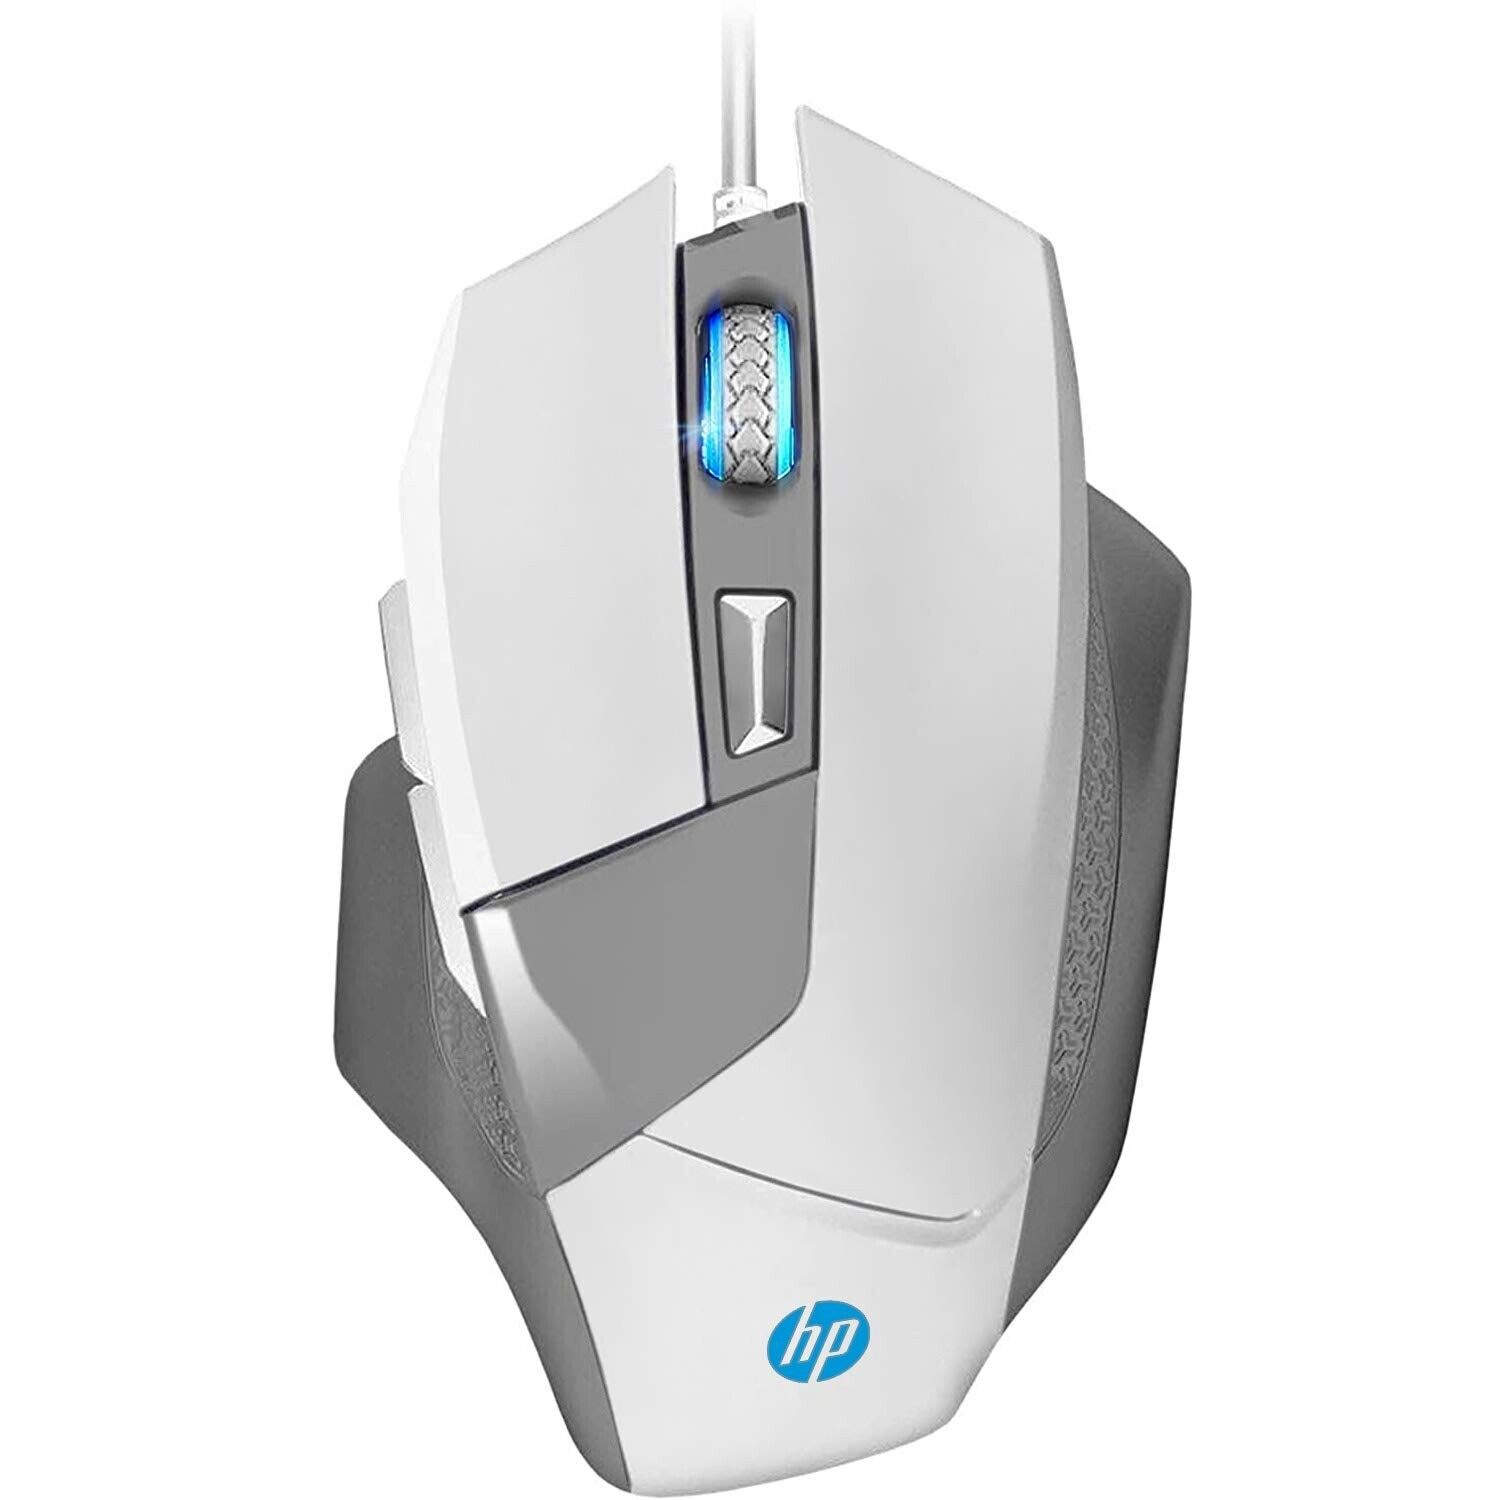 HP G200 wired gaming mouse white 4000 max DPI